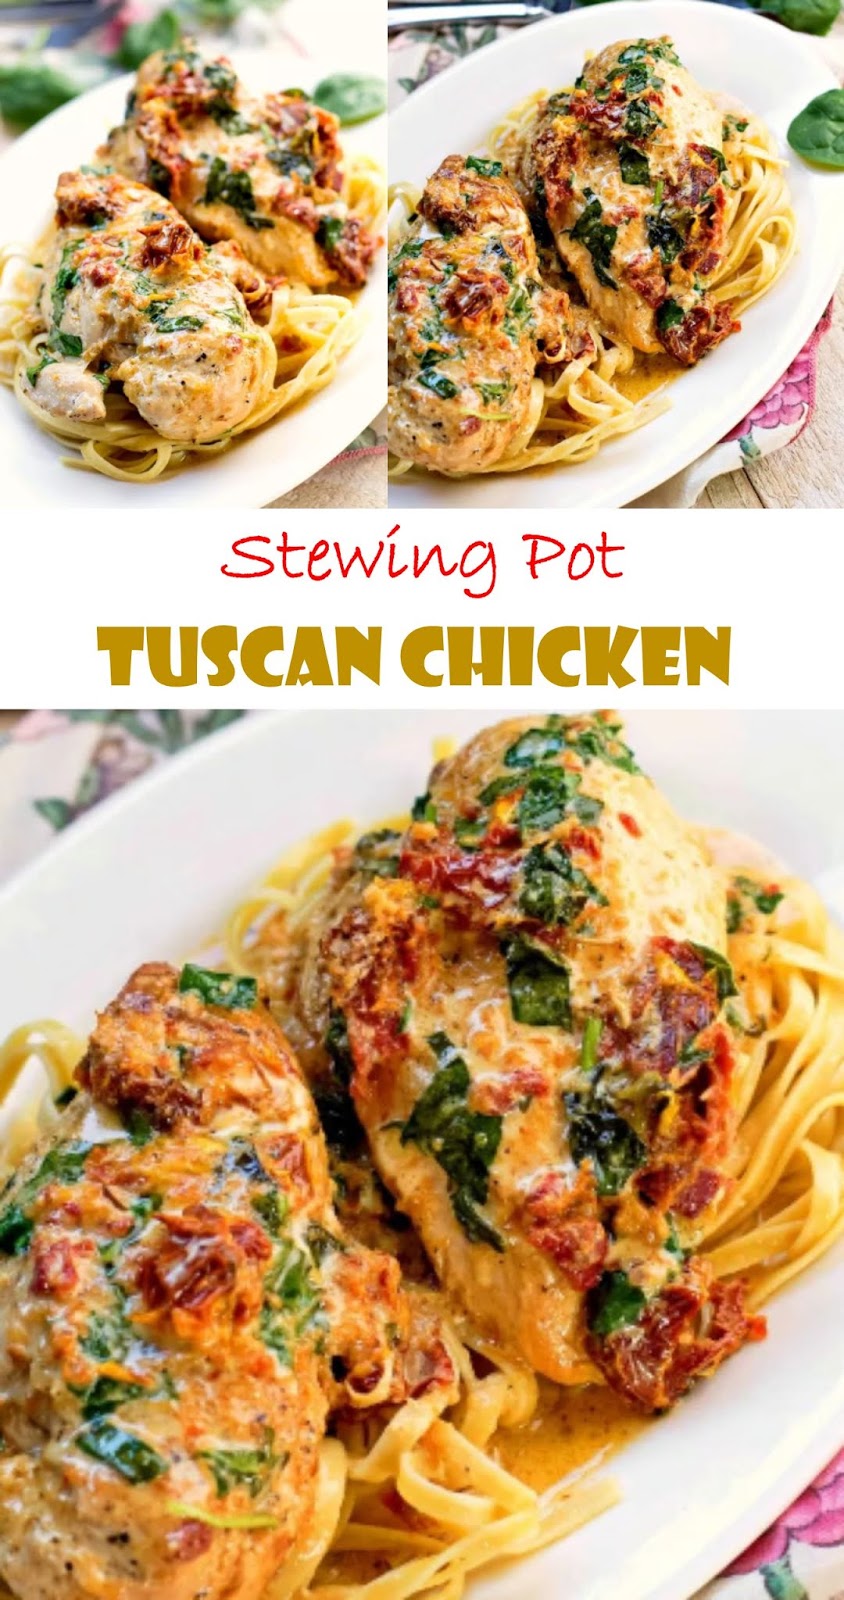 373 Reviews: THE BEST EVER #Recipes >> Stewing pot Tuscan Chicken - # ...